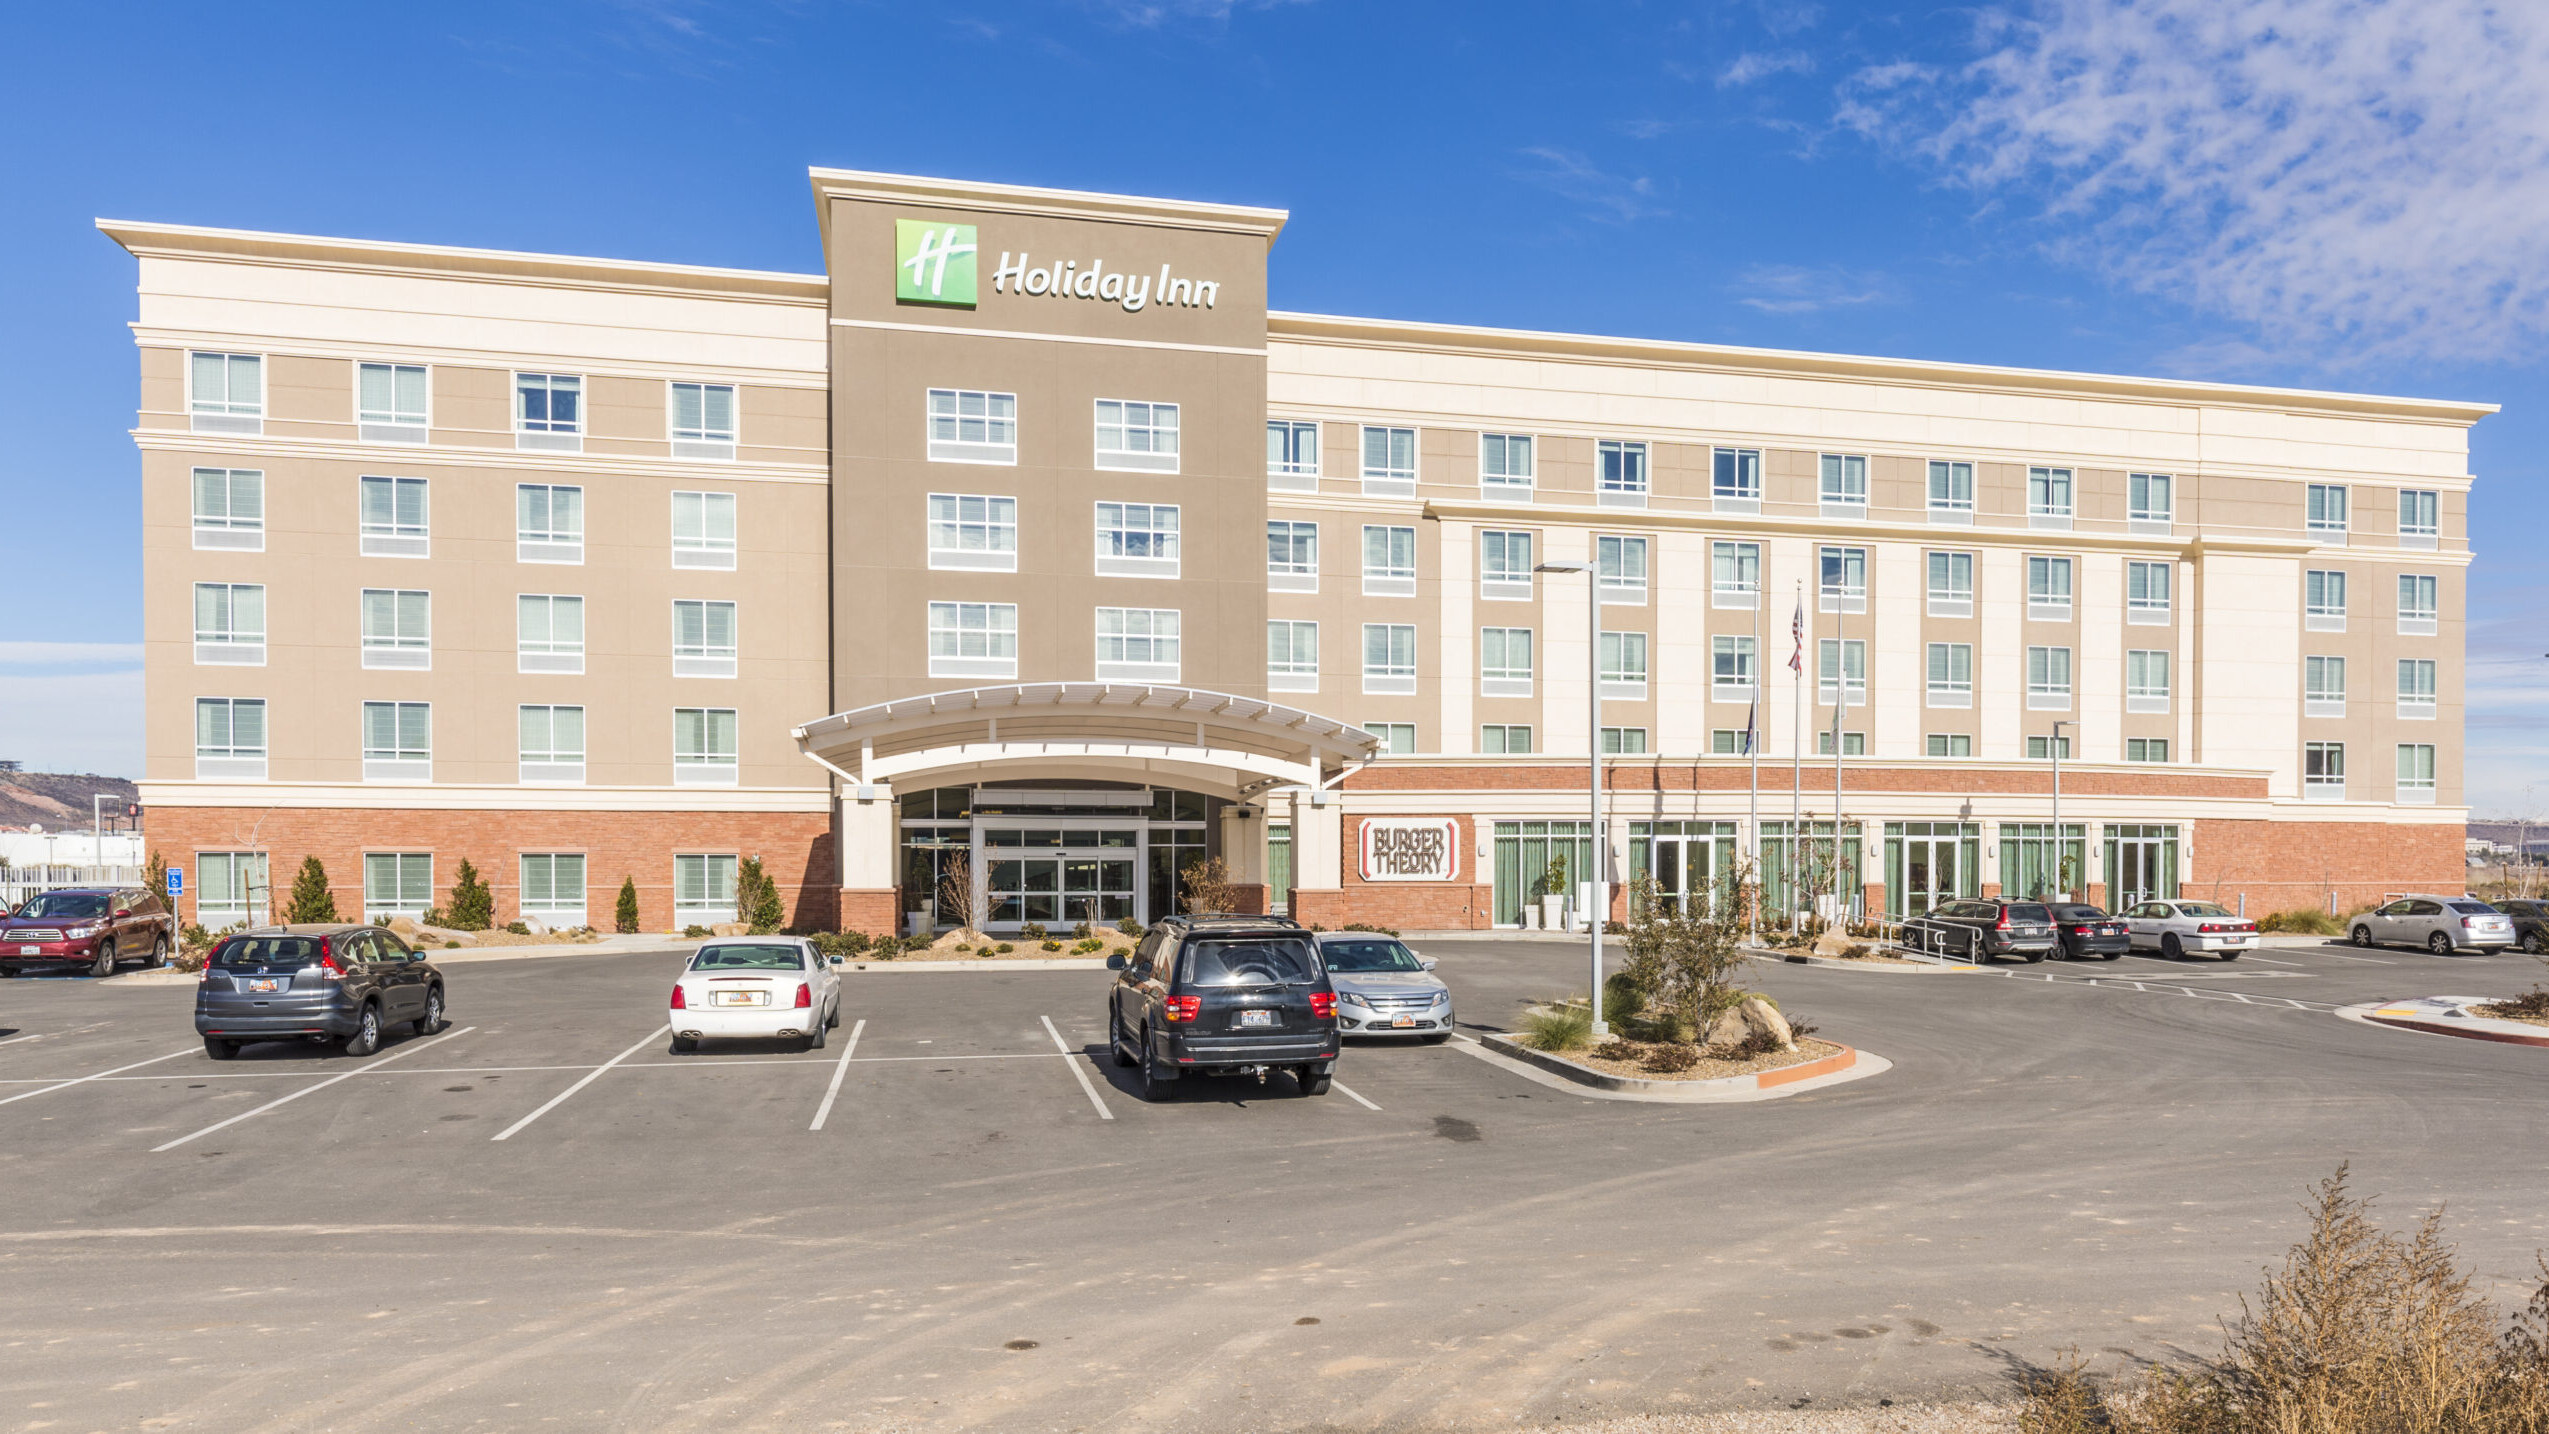 Holiday inn hotel located in Saint George